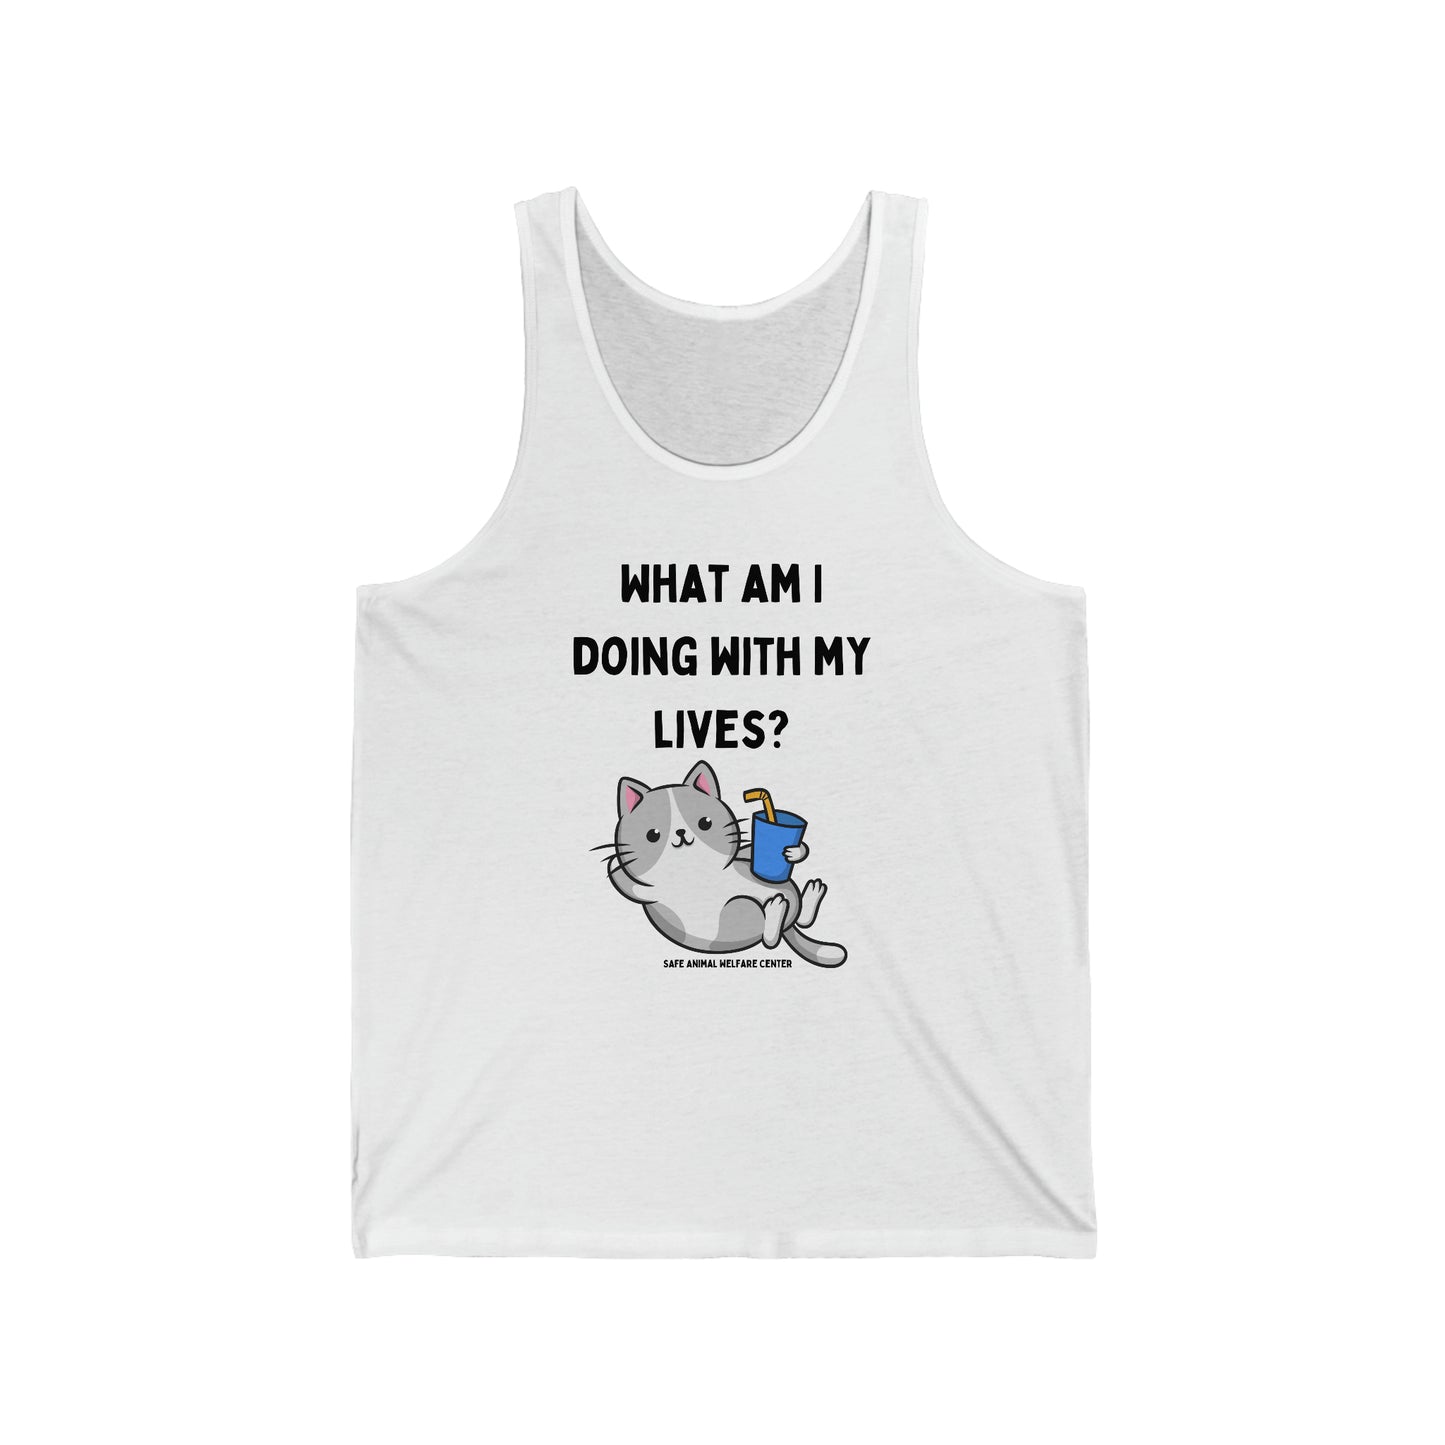 What To Do, What To Do Unisex Jersey Tank